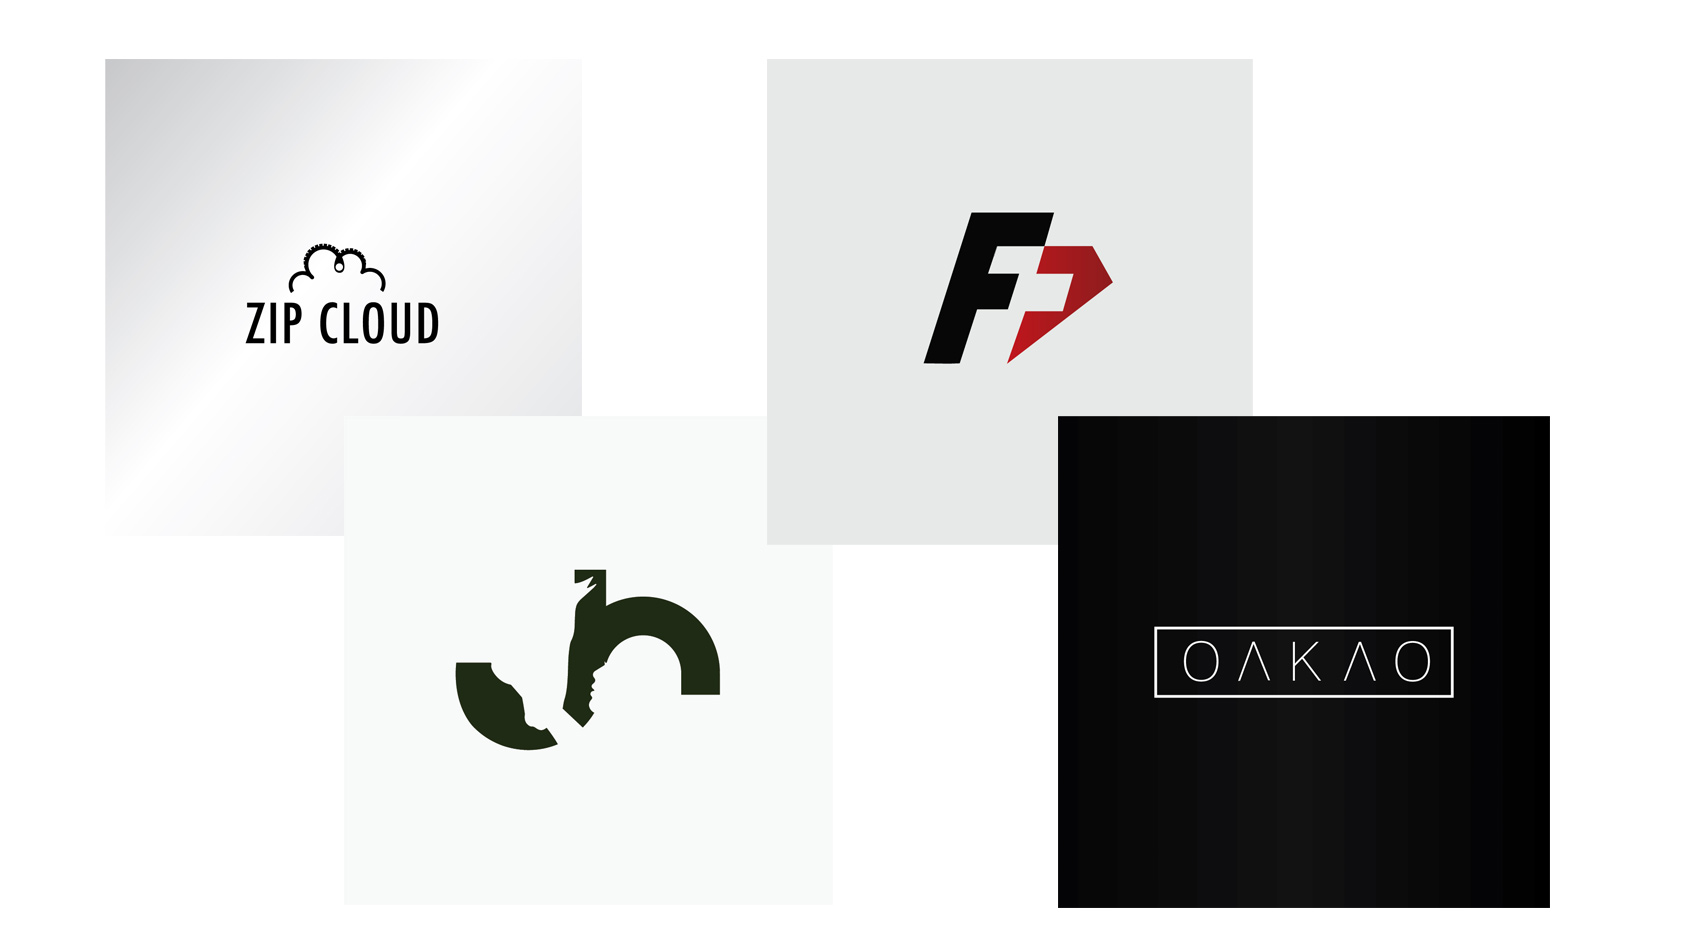 Four logos for different companies.